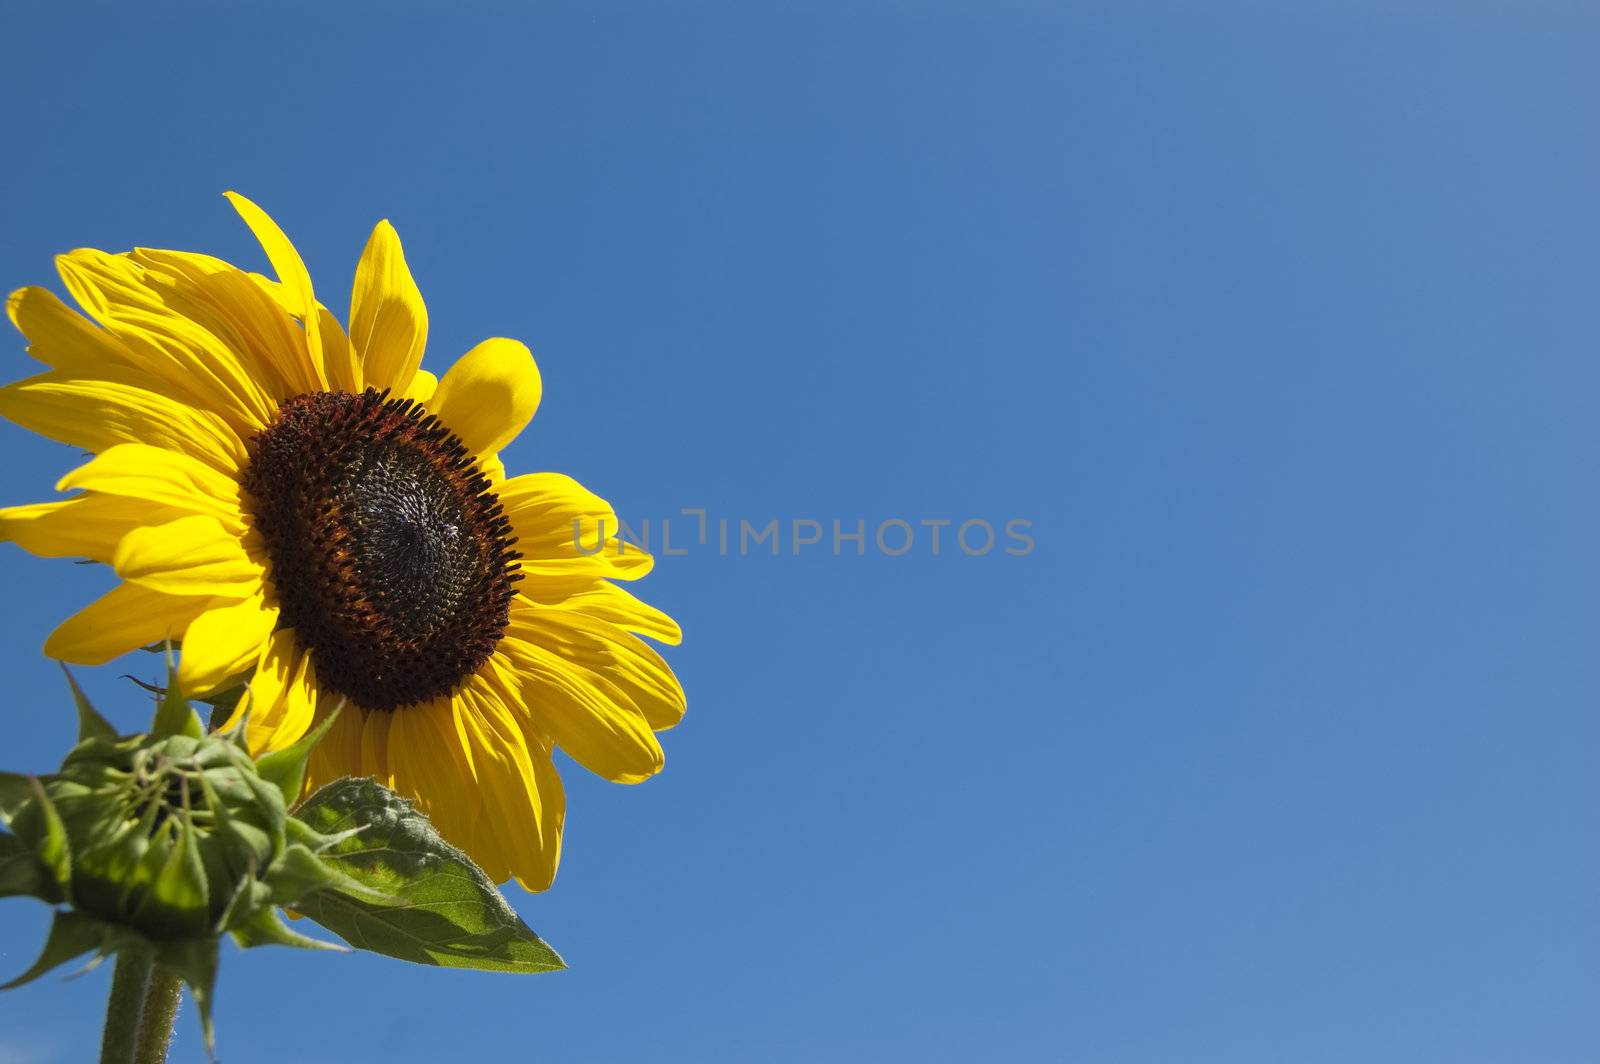 A sunflower in the sky